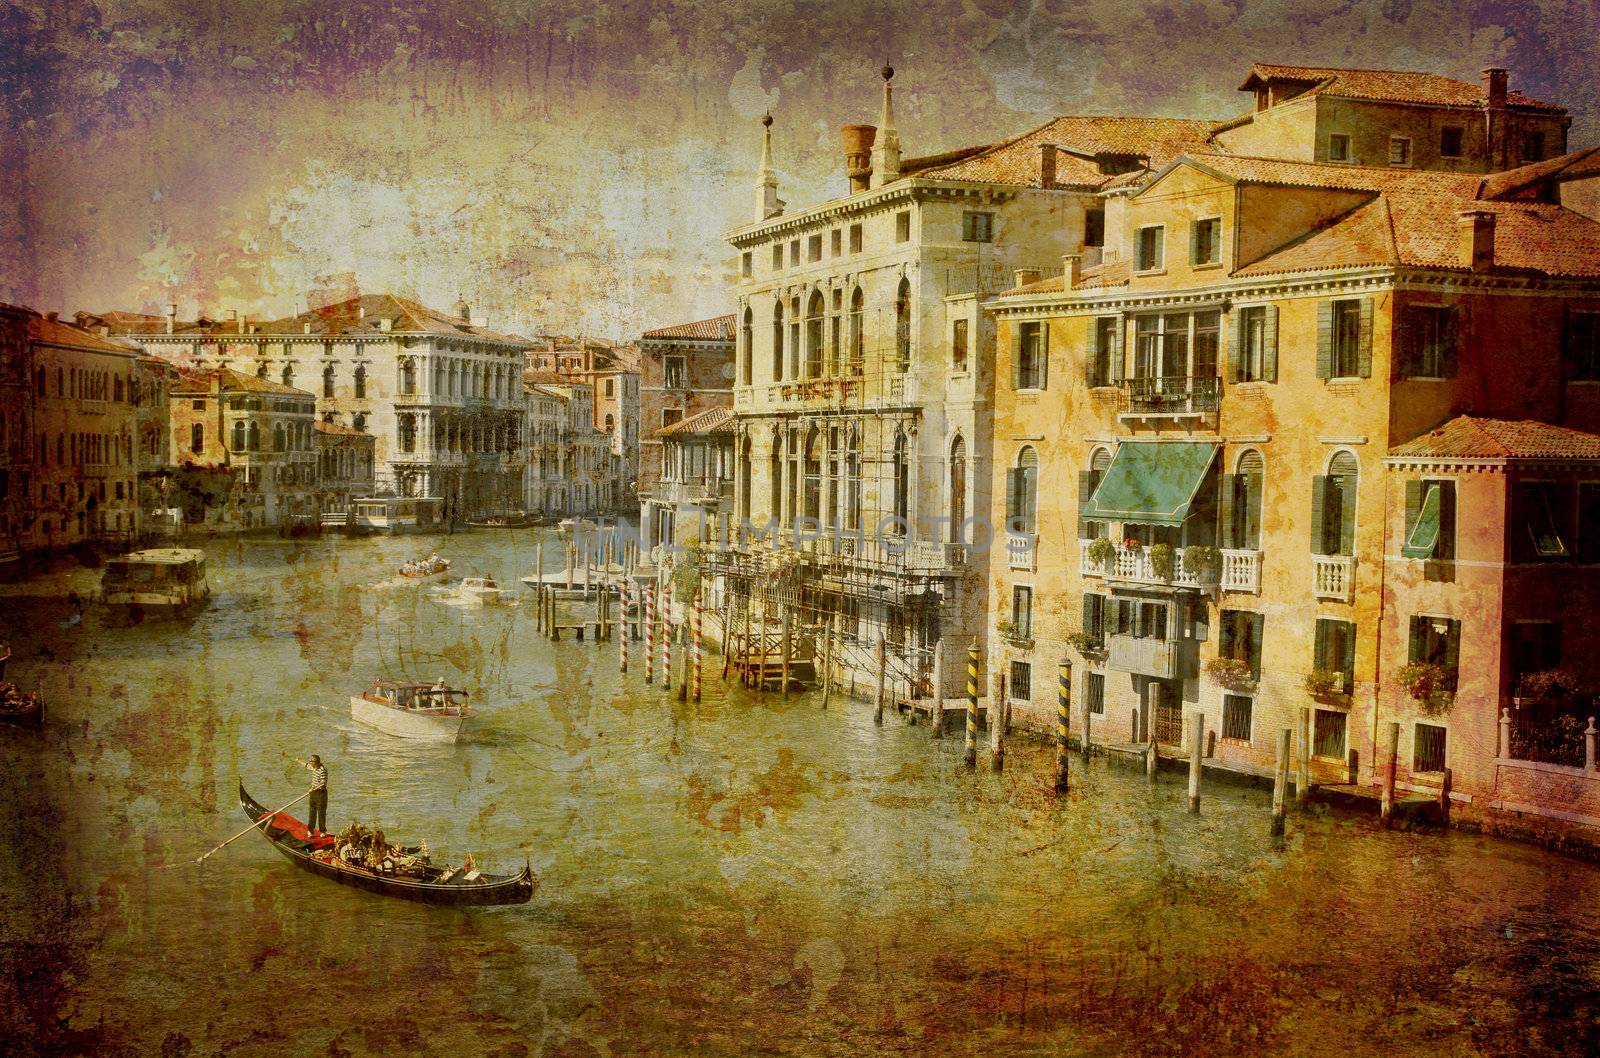 Artistic work of my own in retro style - Postcard from Italy. - Traffic Grand Canal - Venice.